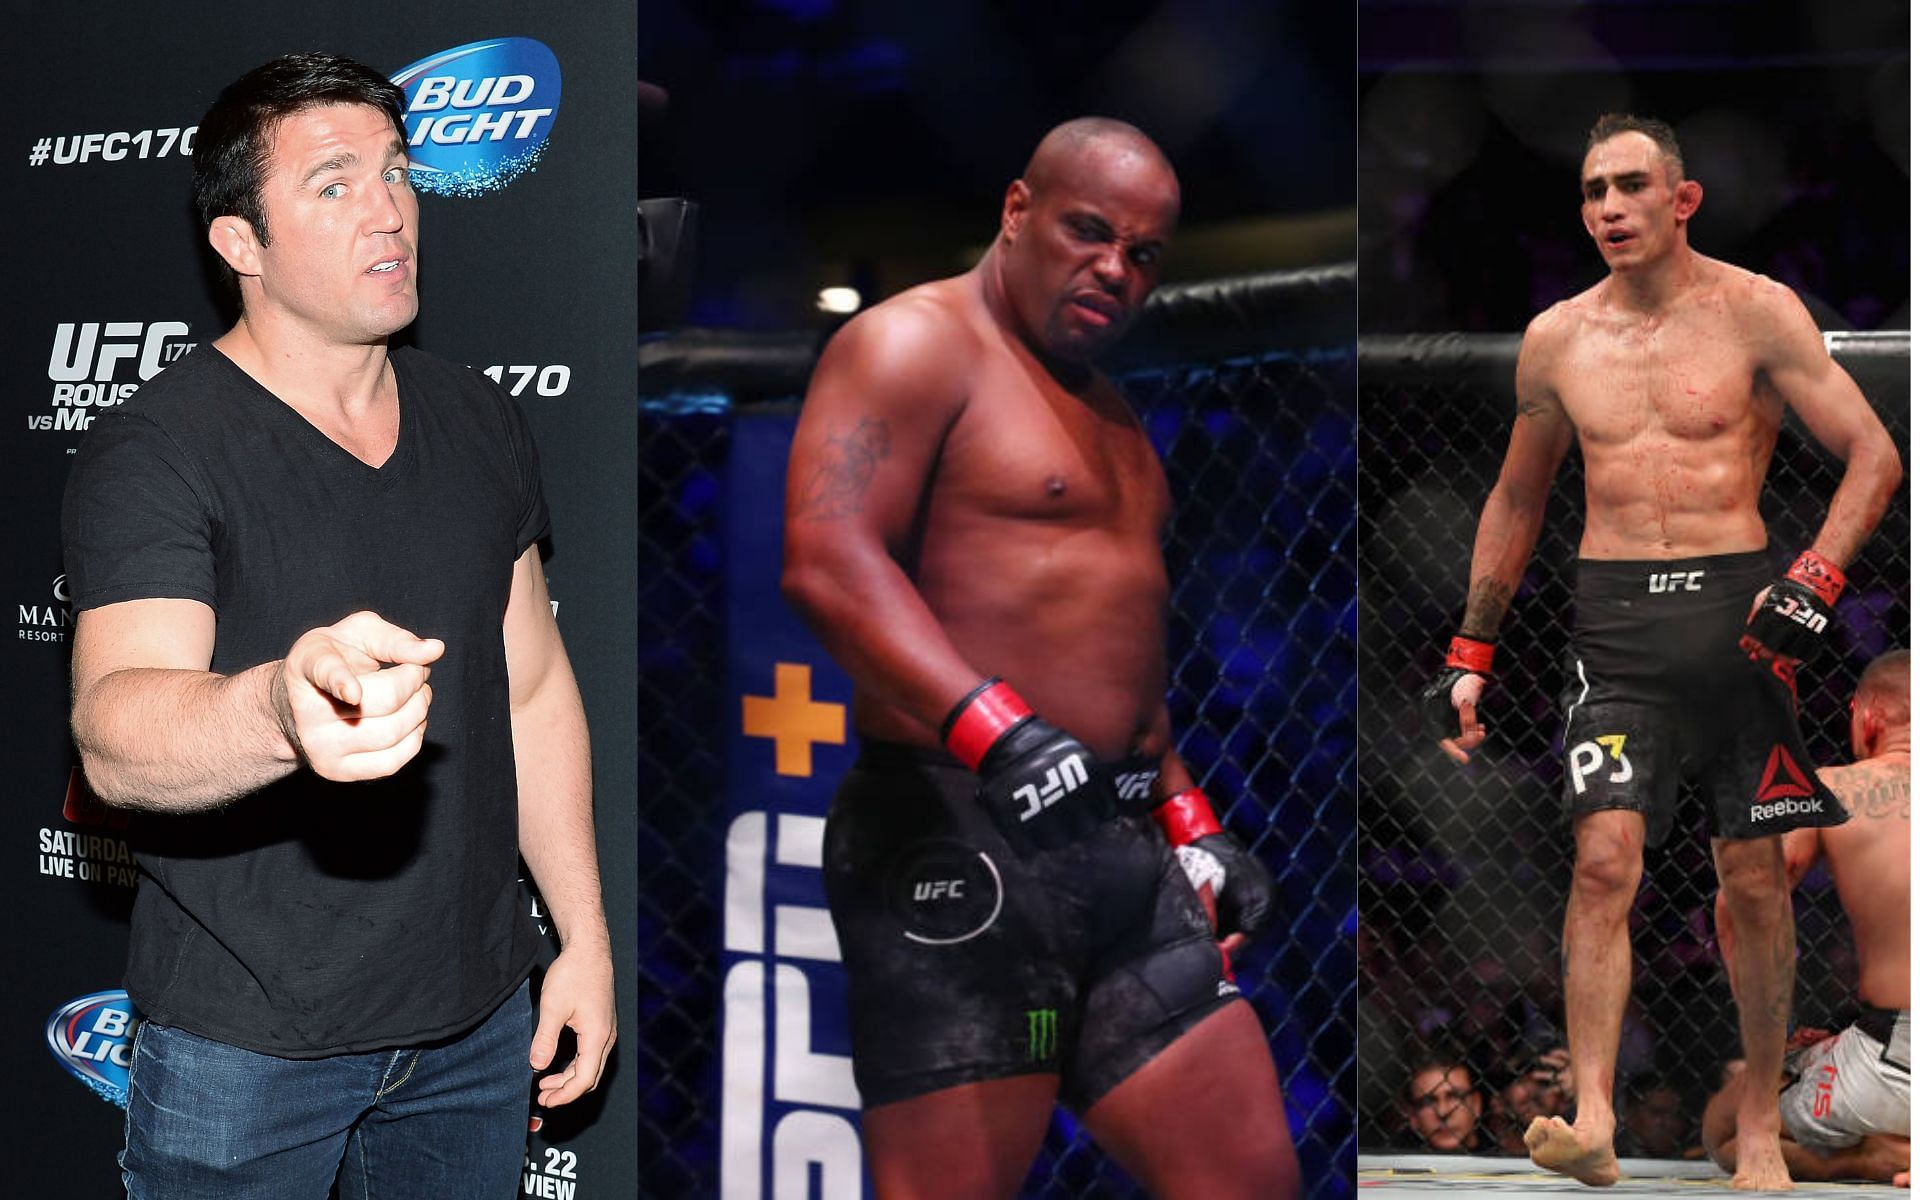 From left to right: Chael Sonnen, Daniel Cormier, and Tony Ferguson